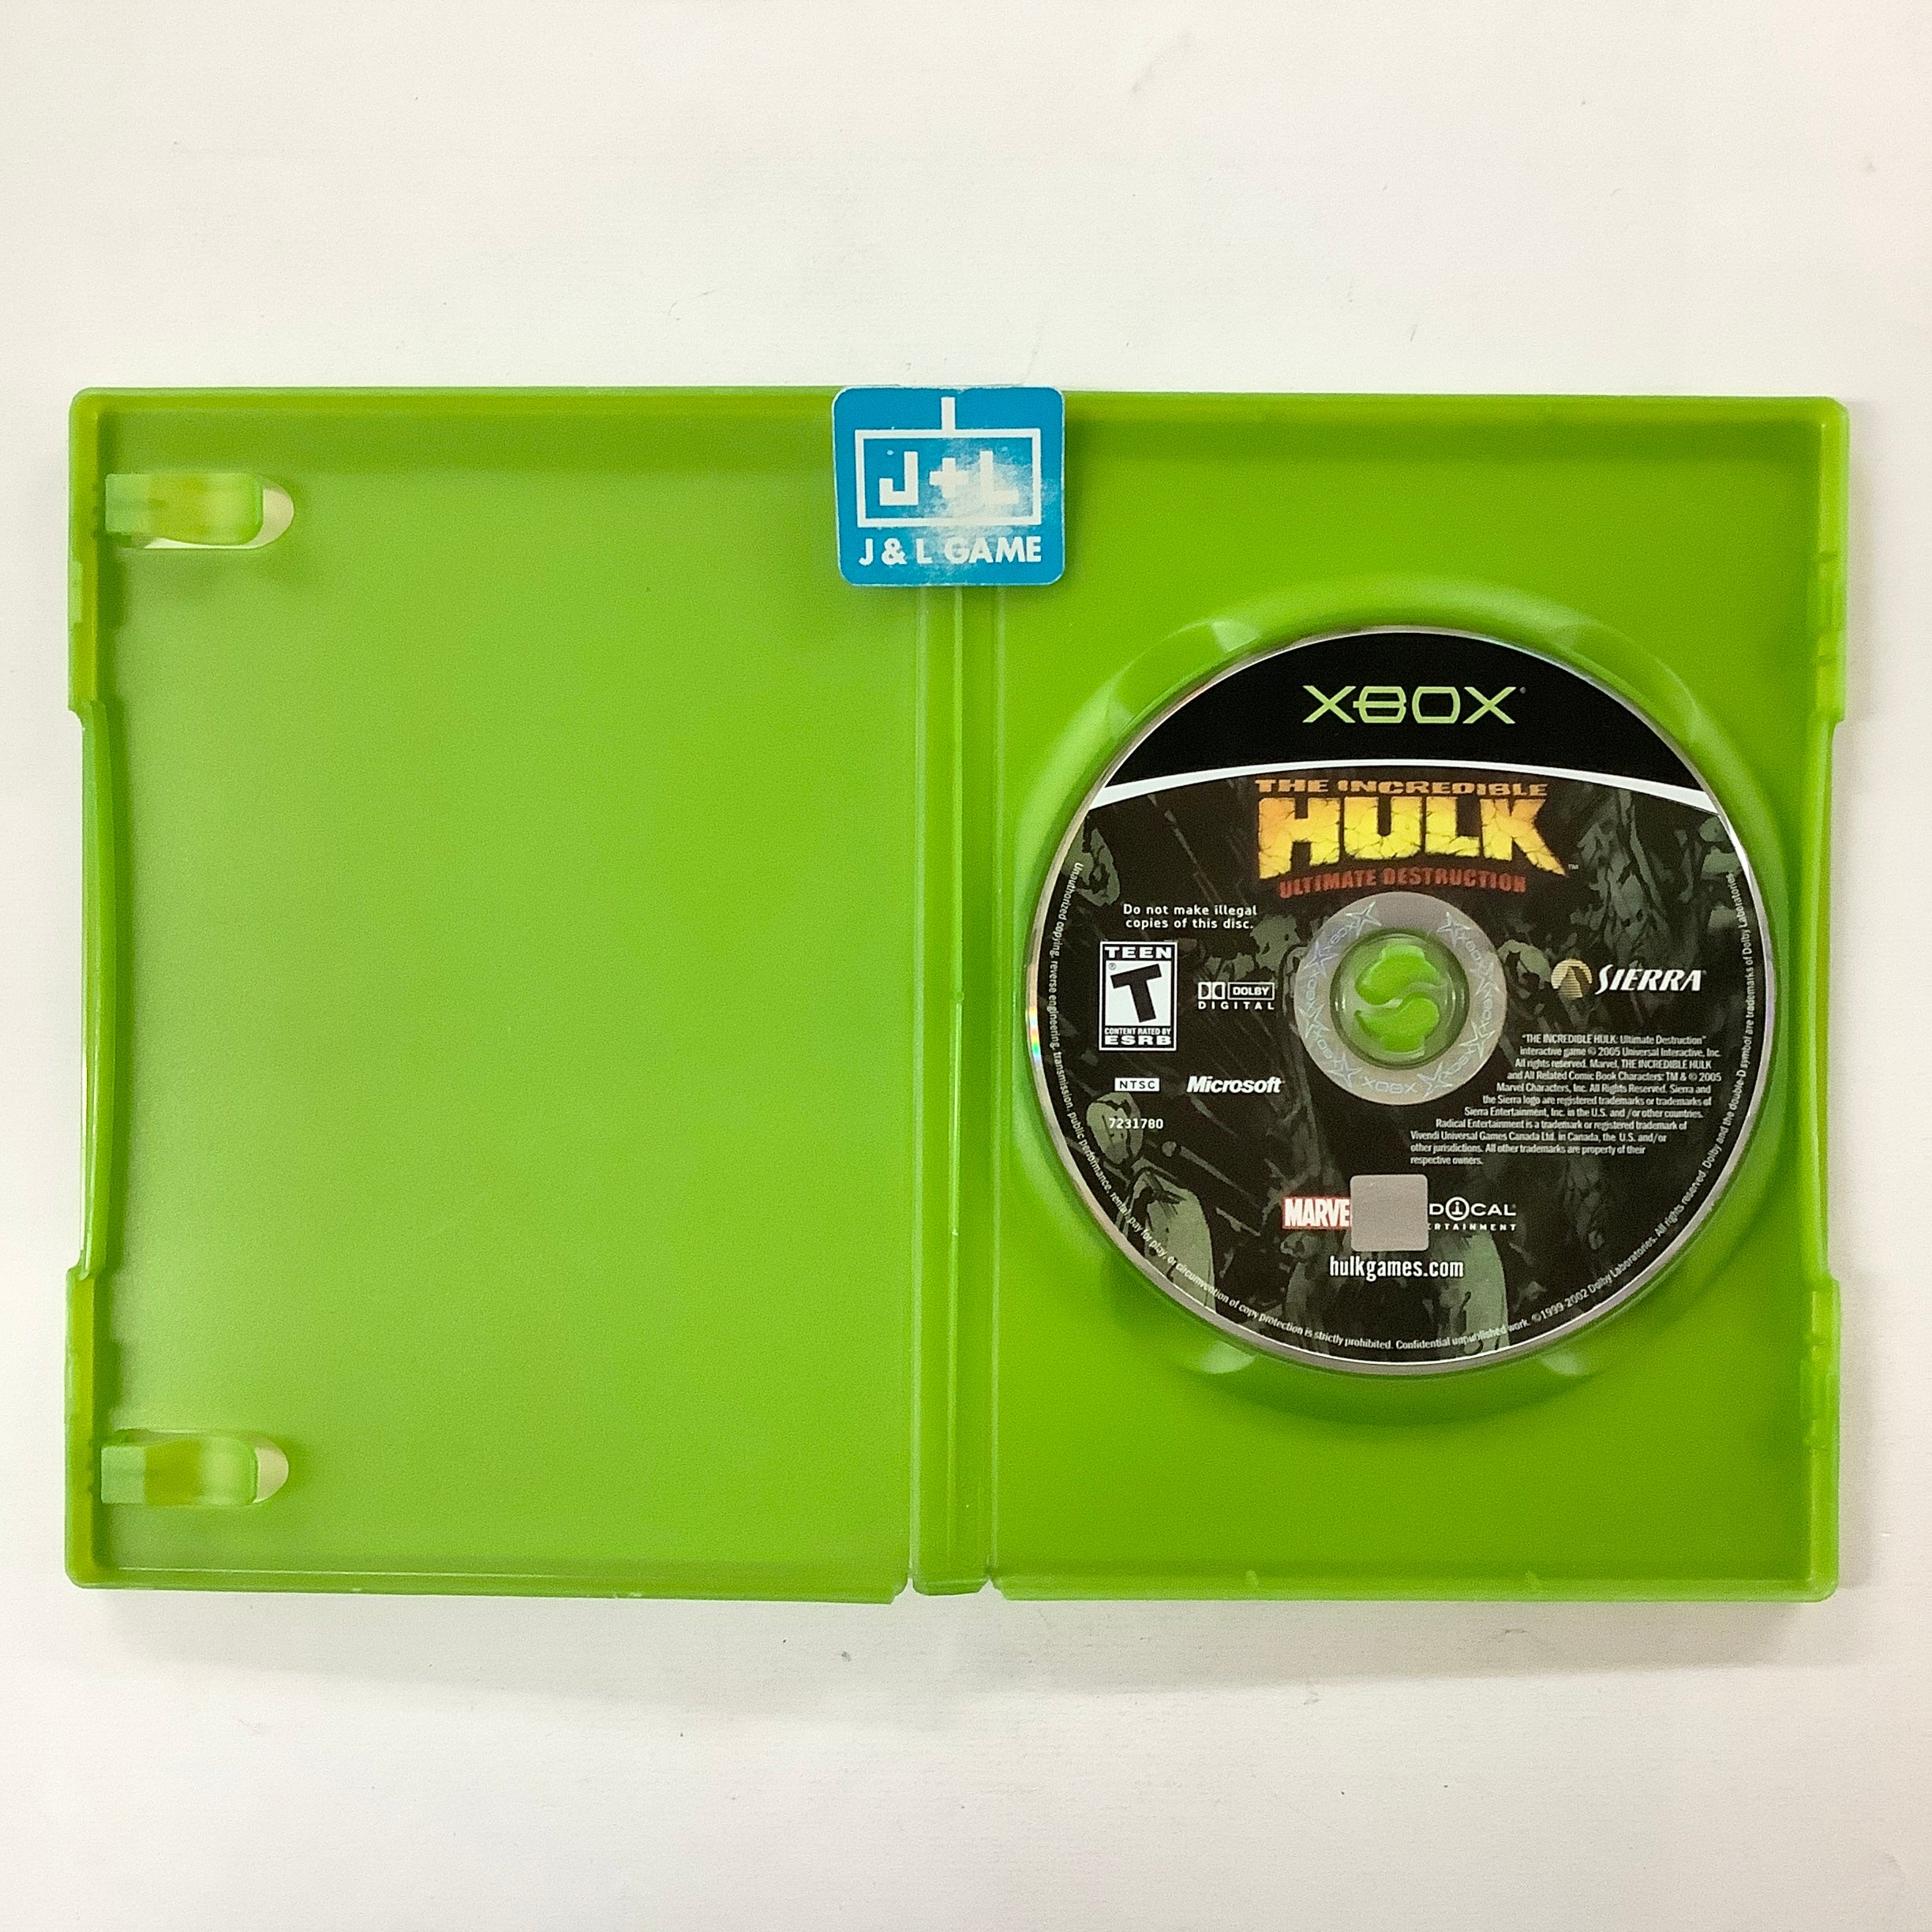 The Incredible Hulk: Ultimate Destruction - (XB) Xbox [Pre-Owned] Video Games VU Games   